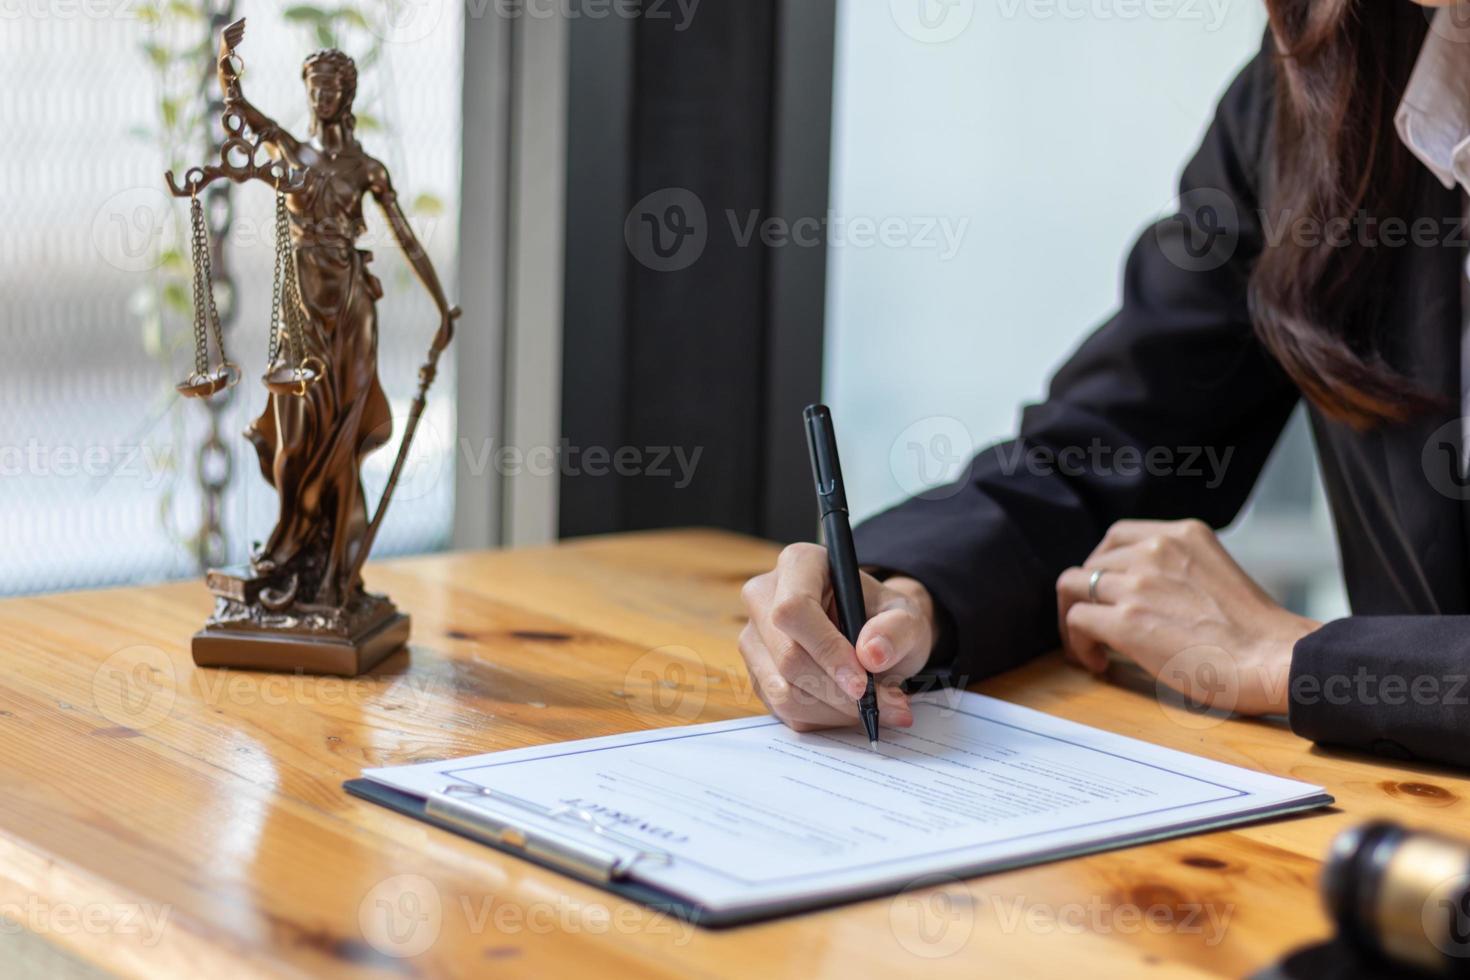 Lawyer holding contract documents in hand and preparing to sign a consulting contract for a team of business people who need legal advice to run their business in accordance with the law photo